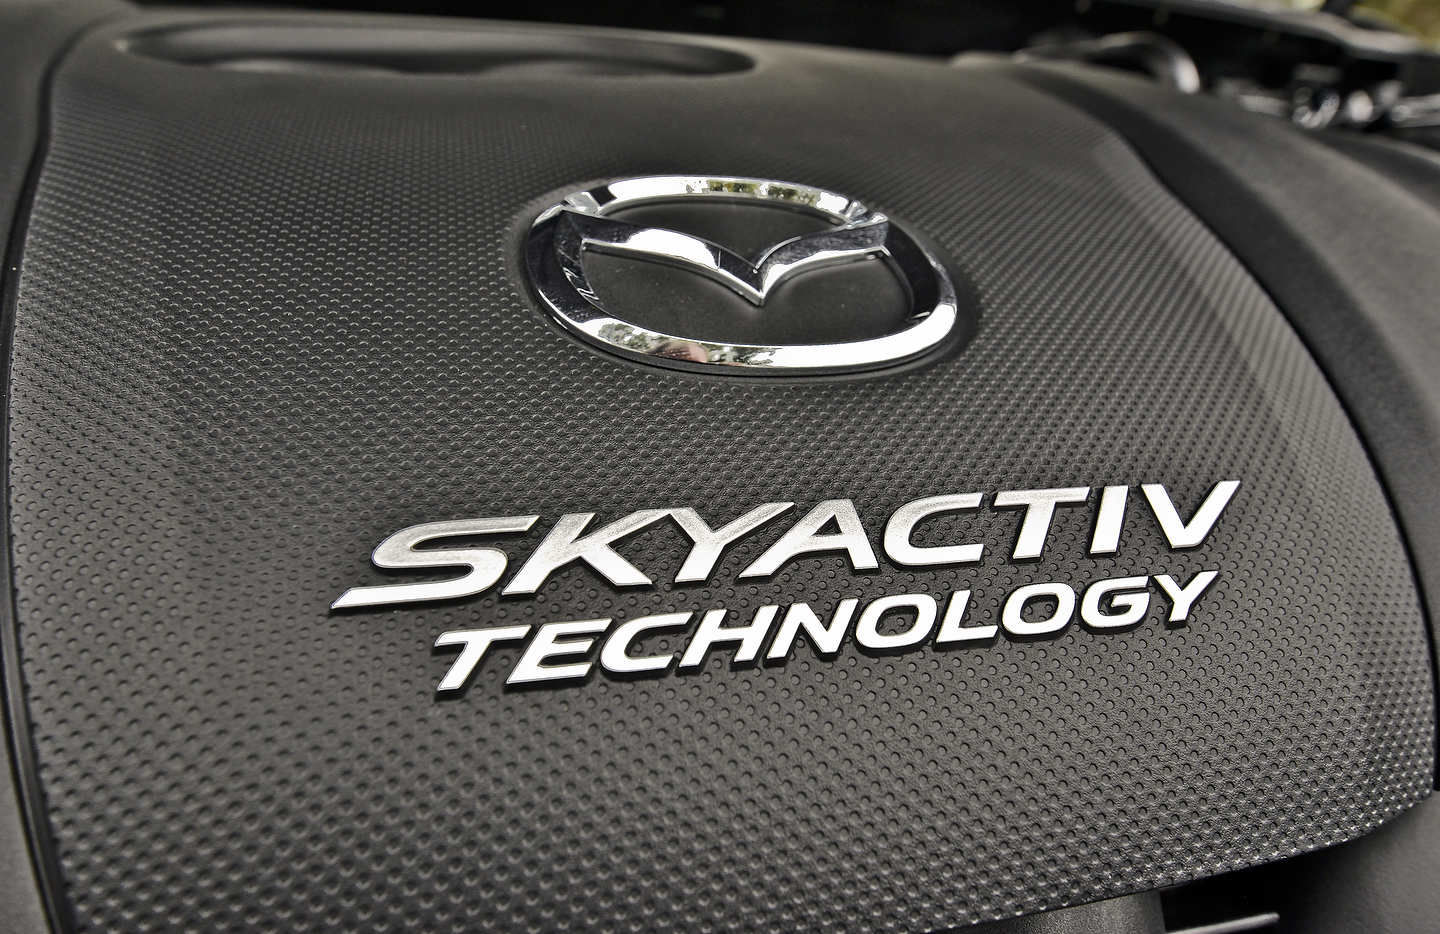 What is SKYACTIV technology, and why does it matter?